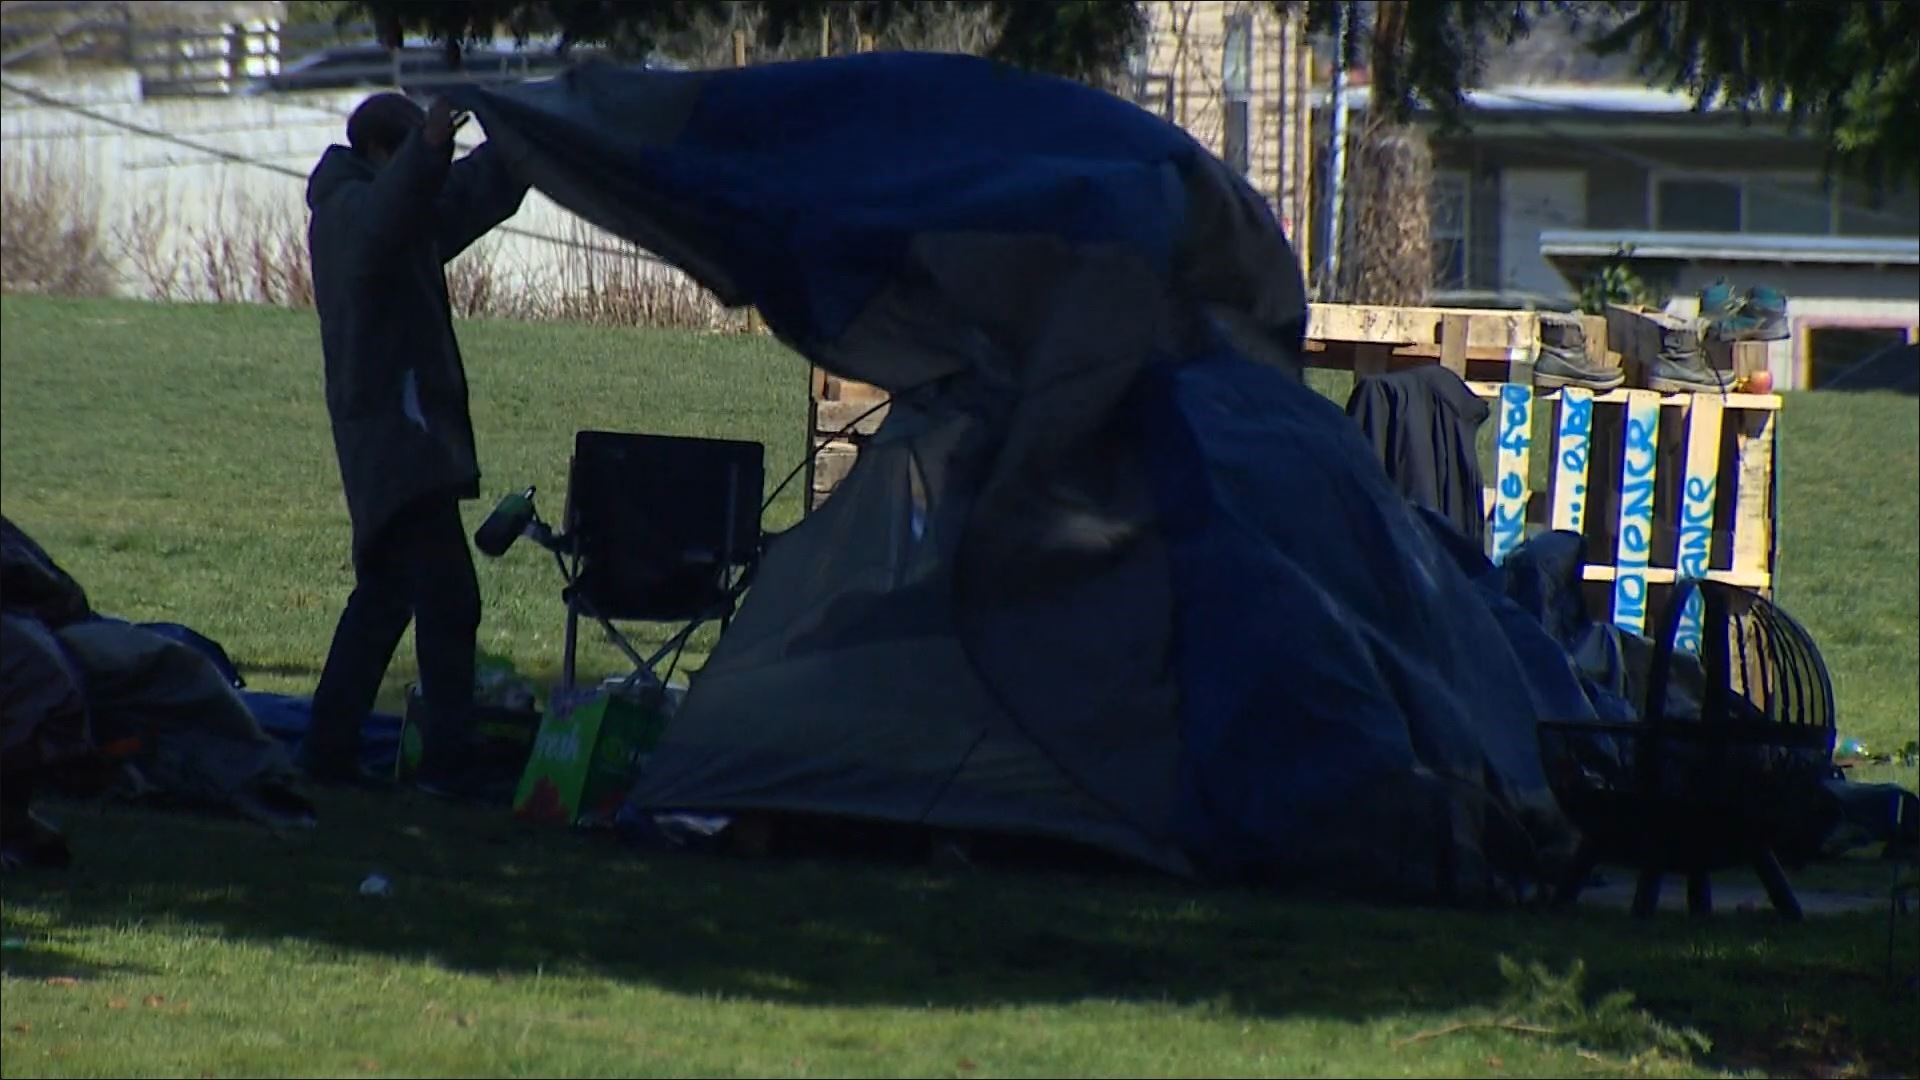 The camp was supposed to be dismantled last Friday. It remains in the middle of a residential neighborhood.